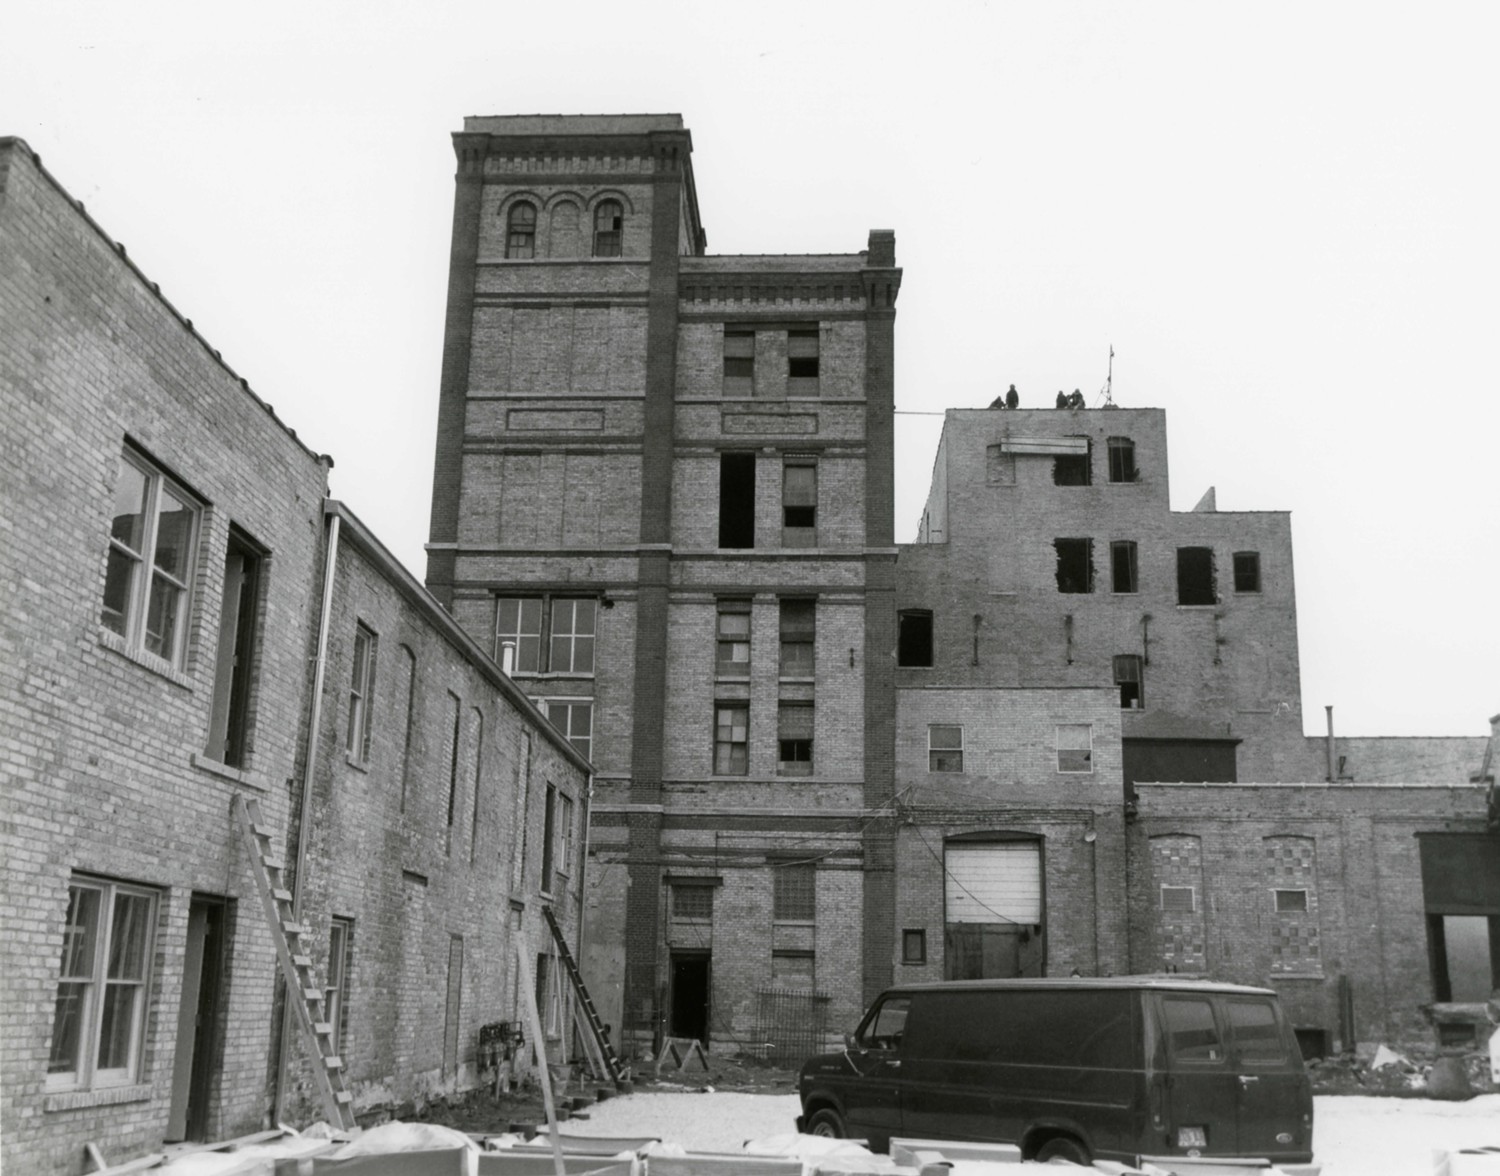 Best Brewing Company of Chicago - Best Brewery, Chicago Illinois West elevation (1987)